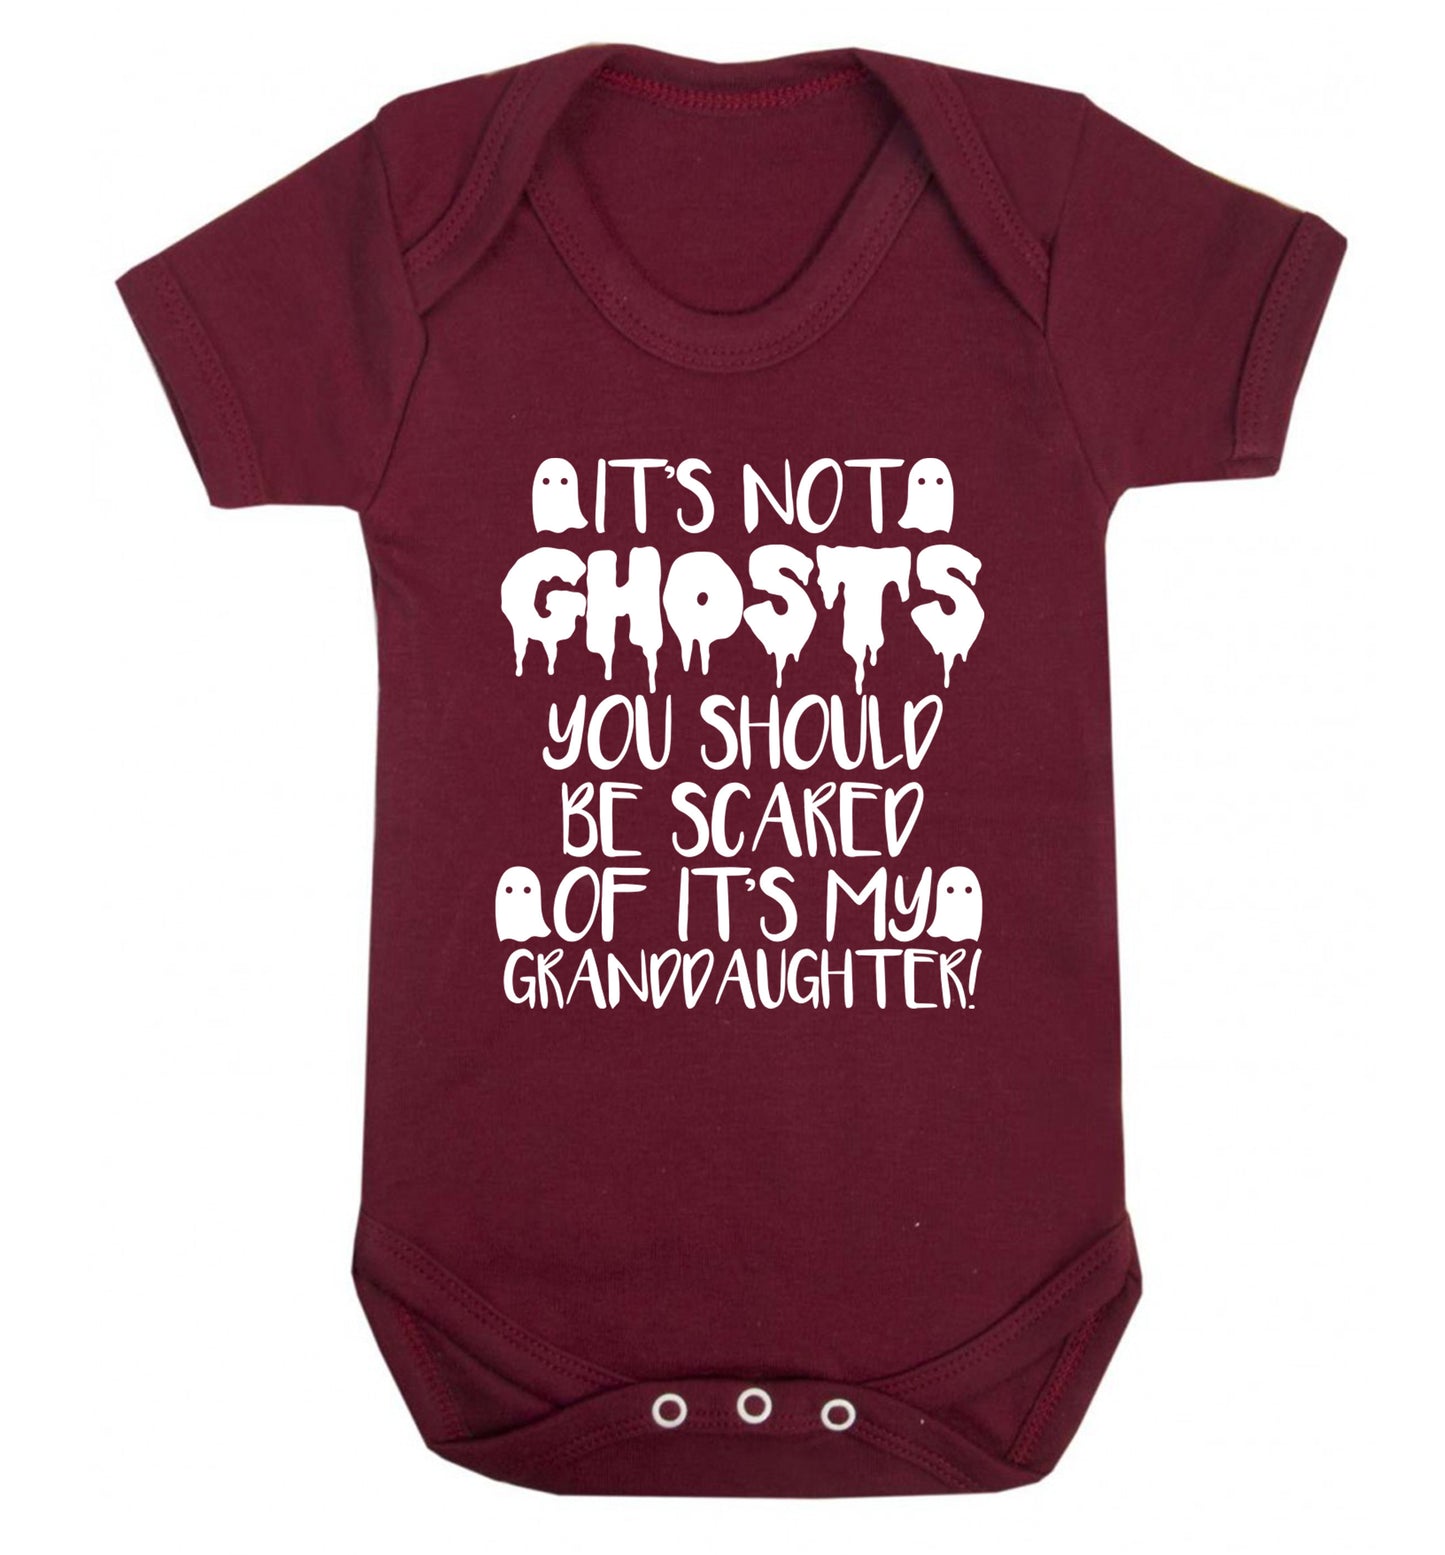 It's not ghosts you should be scared of it's my granddaughter! Baby Vest maroon 18-24 months